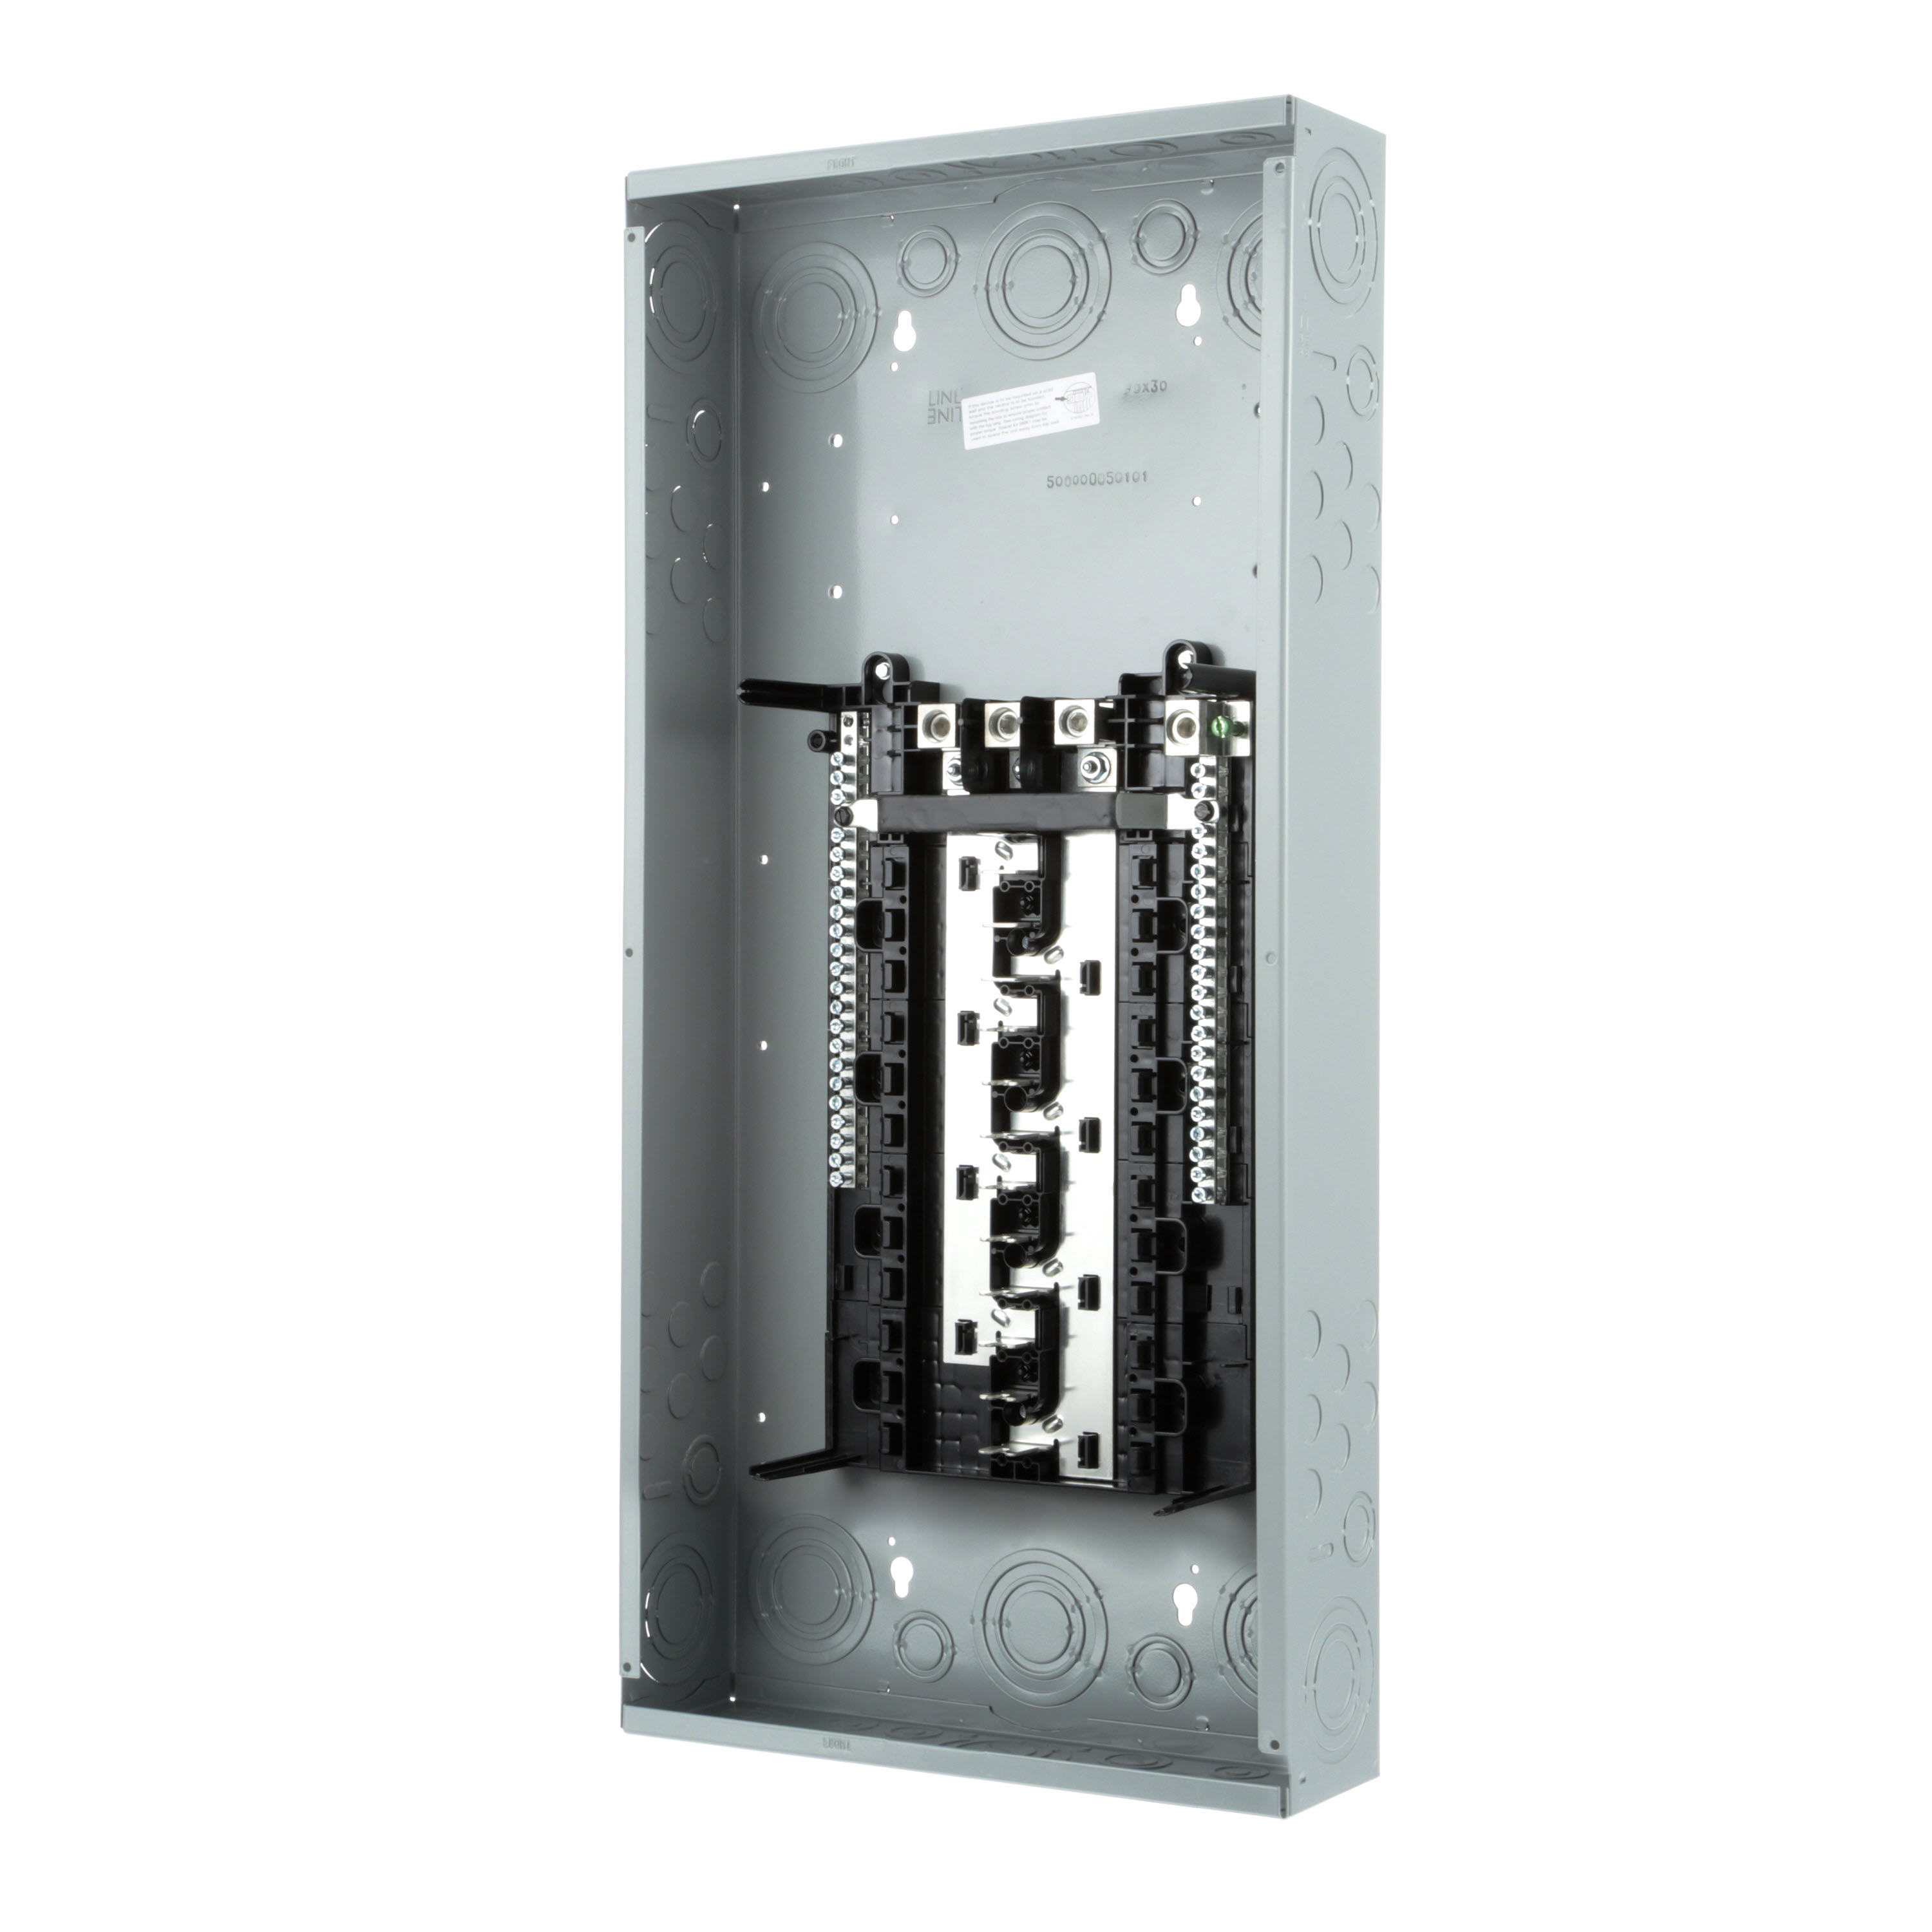 SIEMENS LOW VOLTAGE ES SERIES LOAD CENTER. MAIN LUG WITH 24 1-INCH SPACES ALLOWING MAX 42 CIRCUITS. 3-PHASE 4-WIRE SYSTEM RATED 120/240V OR 120/208V (150A) 100KA INTERRUPT. SPECIAL FEATURES ALUMINUM BUS, GRAY TRIM, NEMA TYPE1 ENCLOSURE FORINDOOR USE.